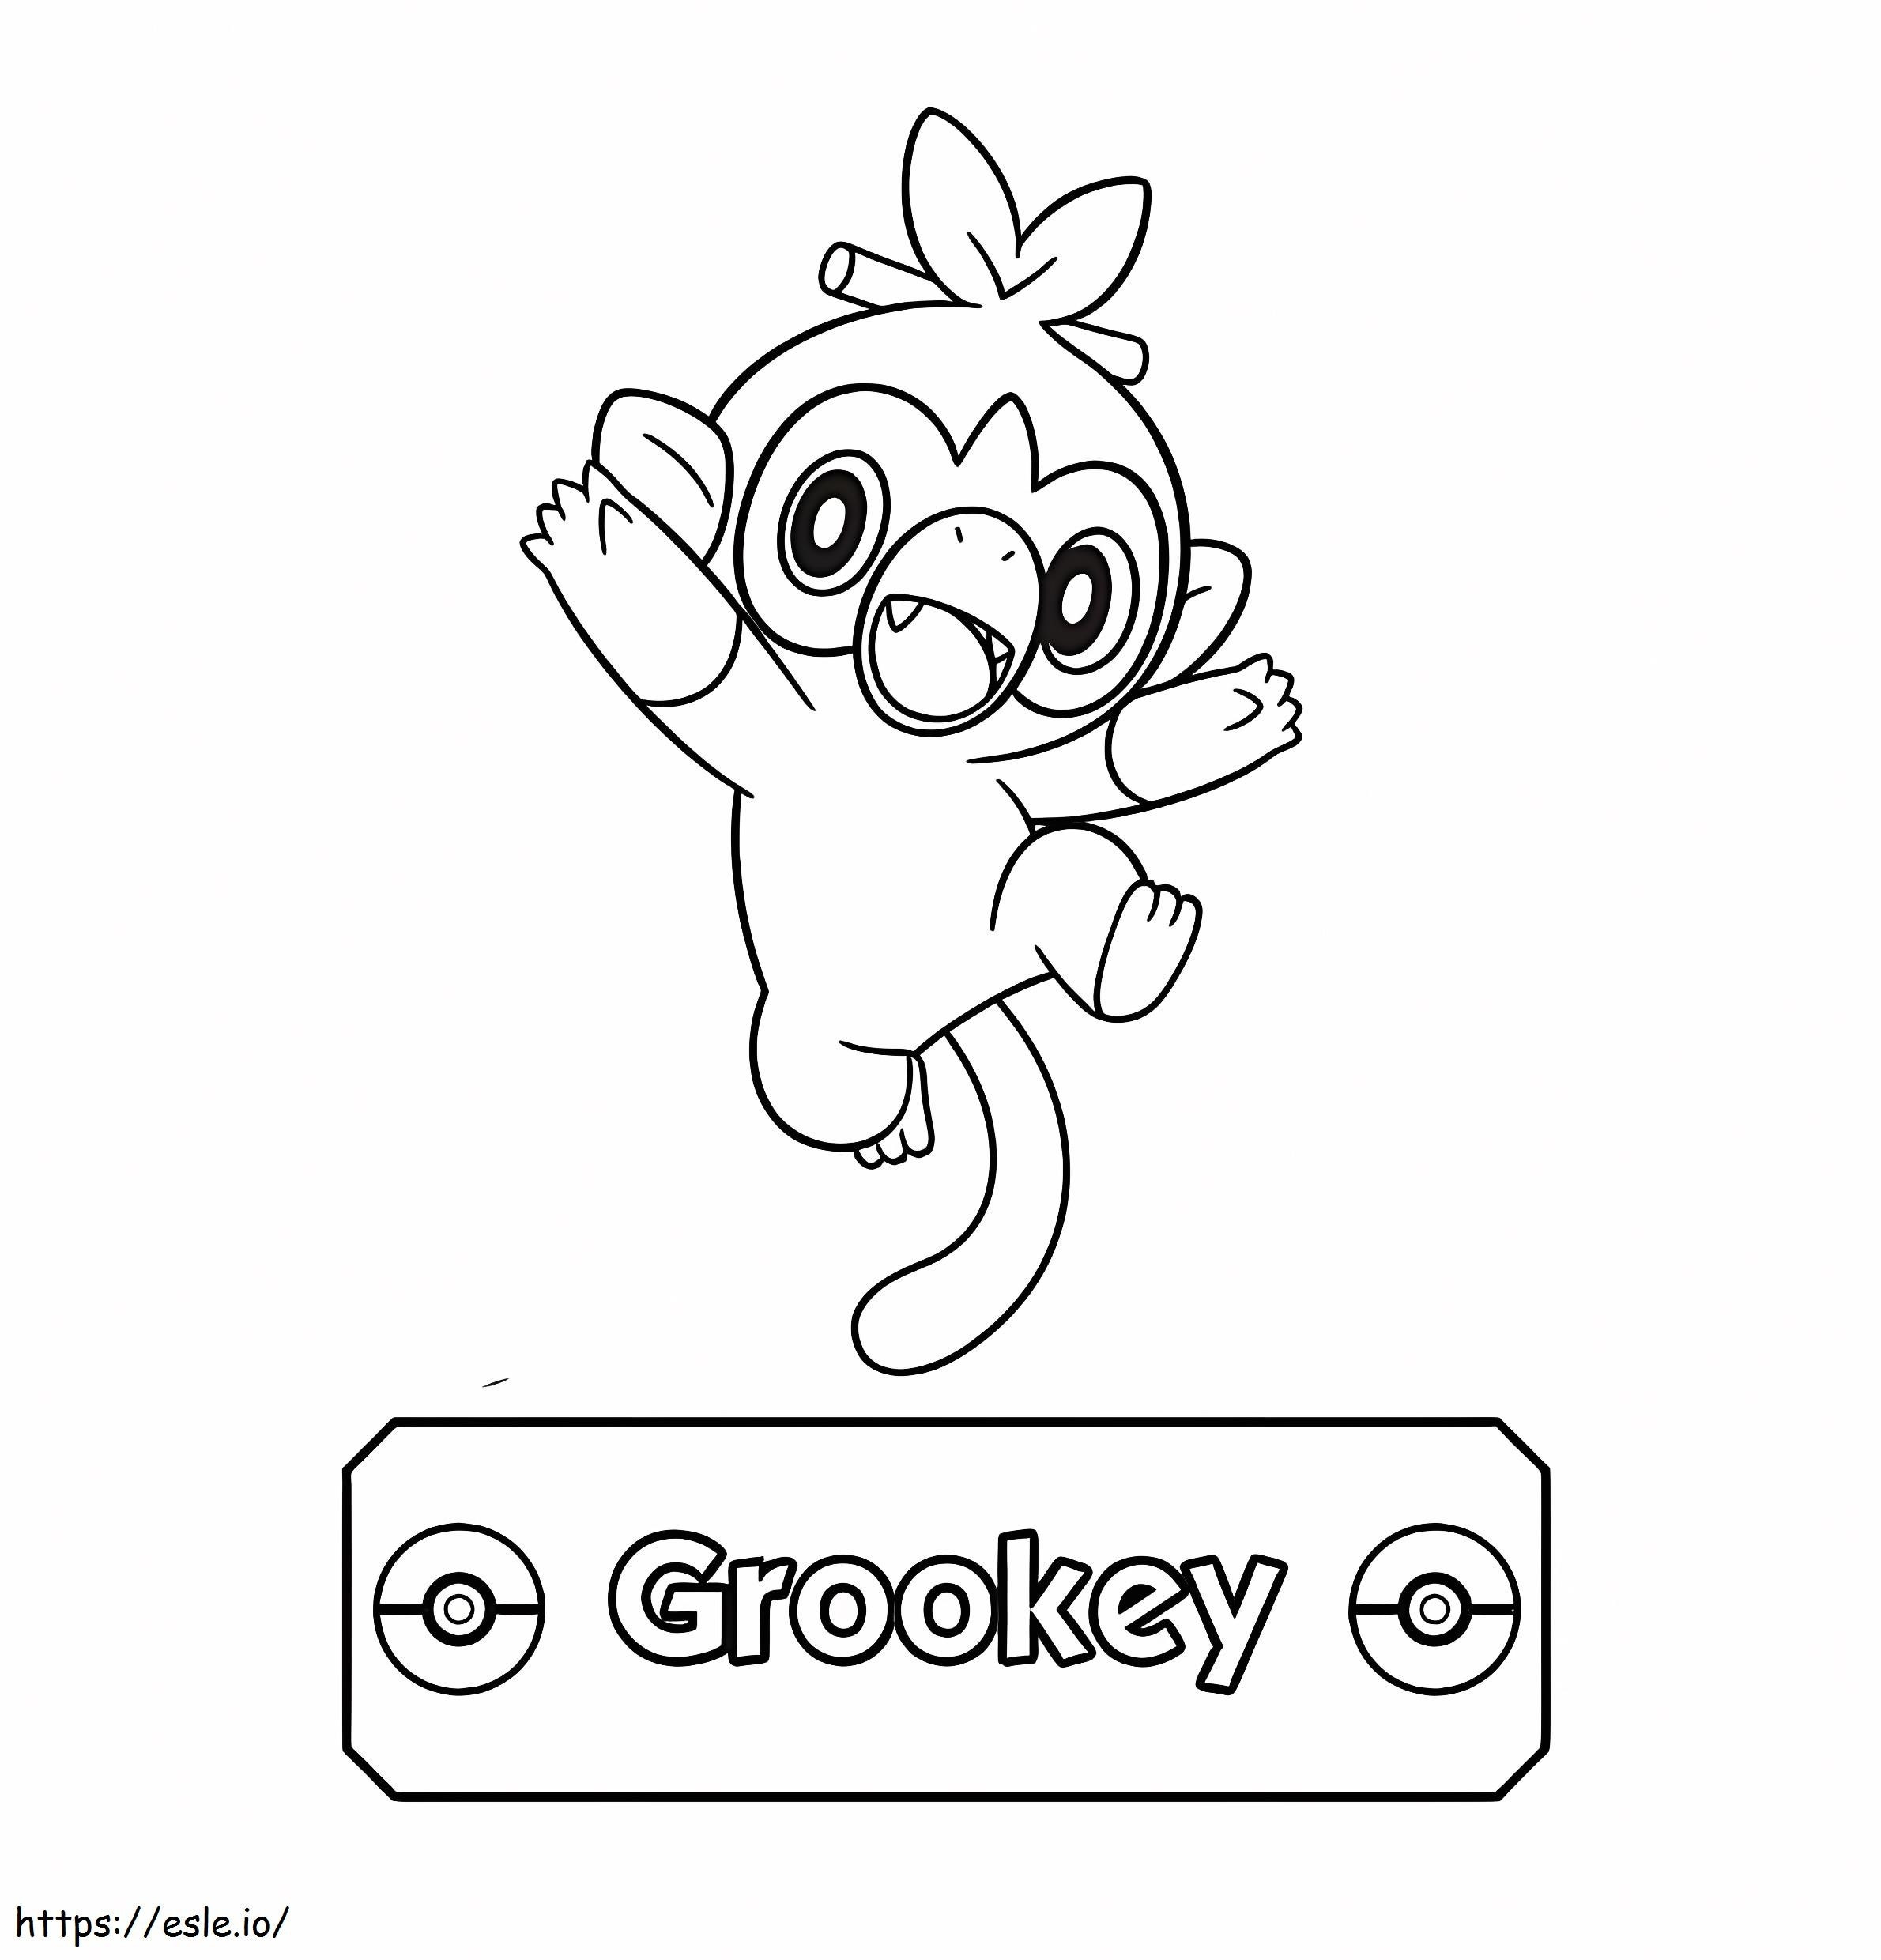 Grookey 3 coloring page